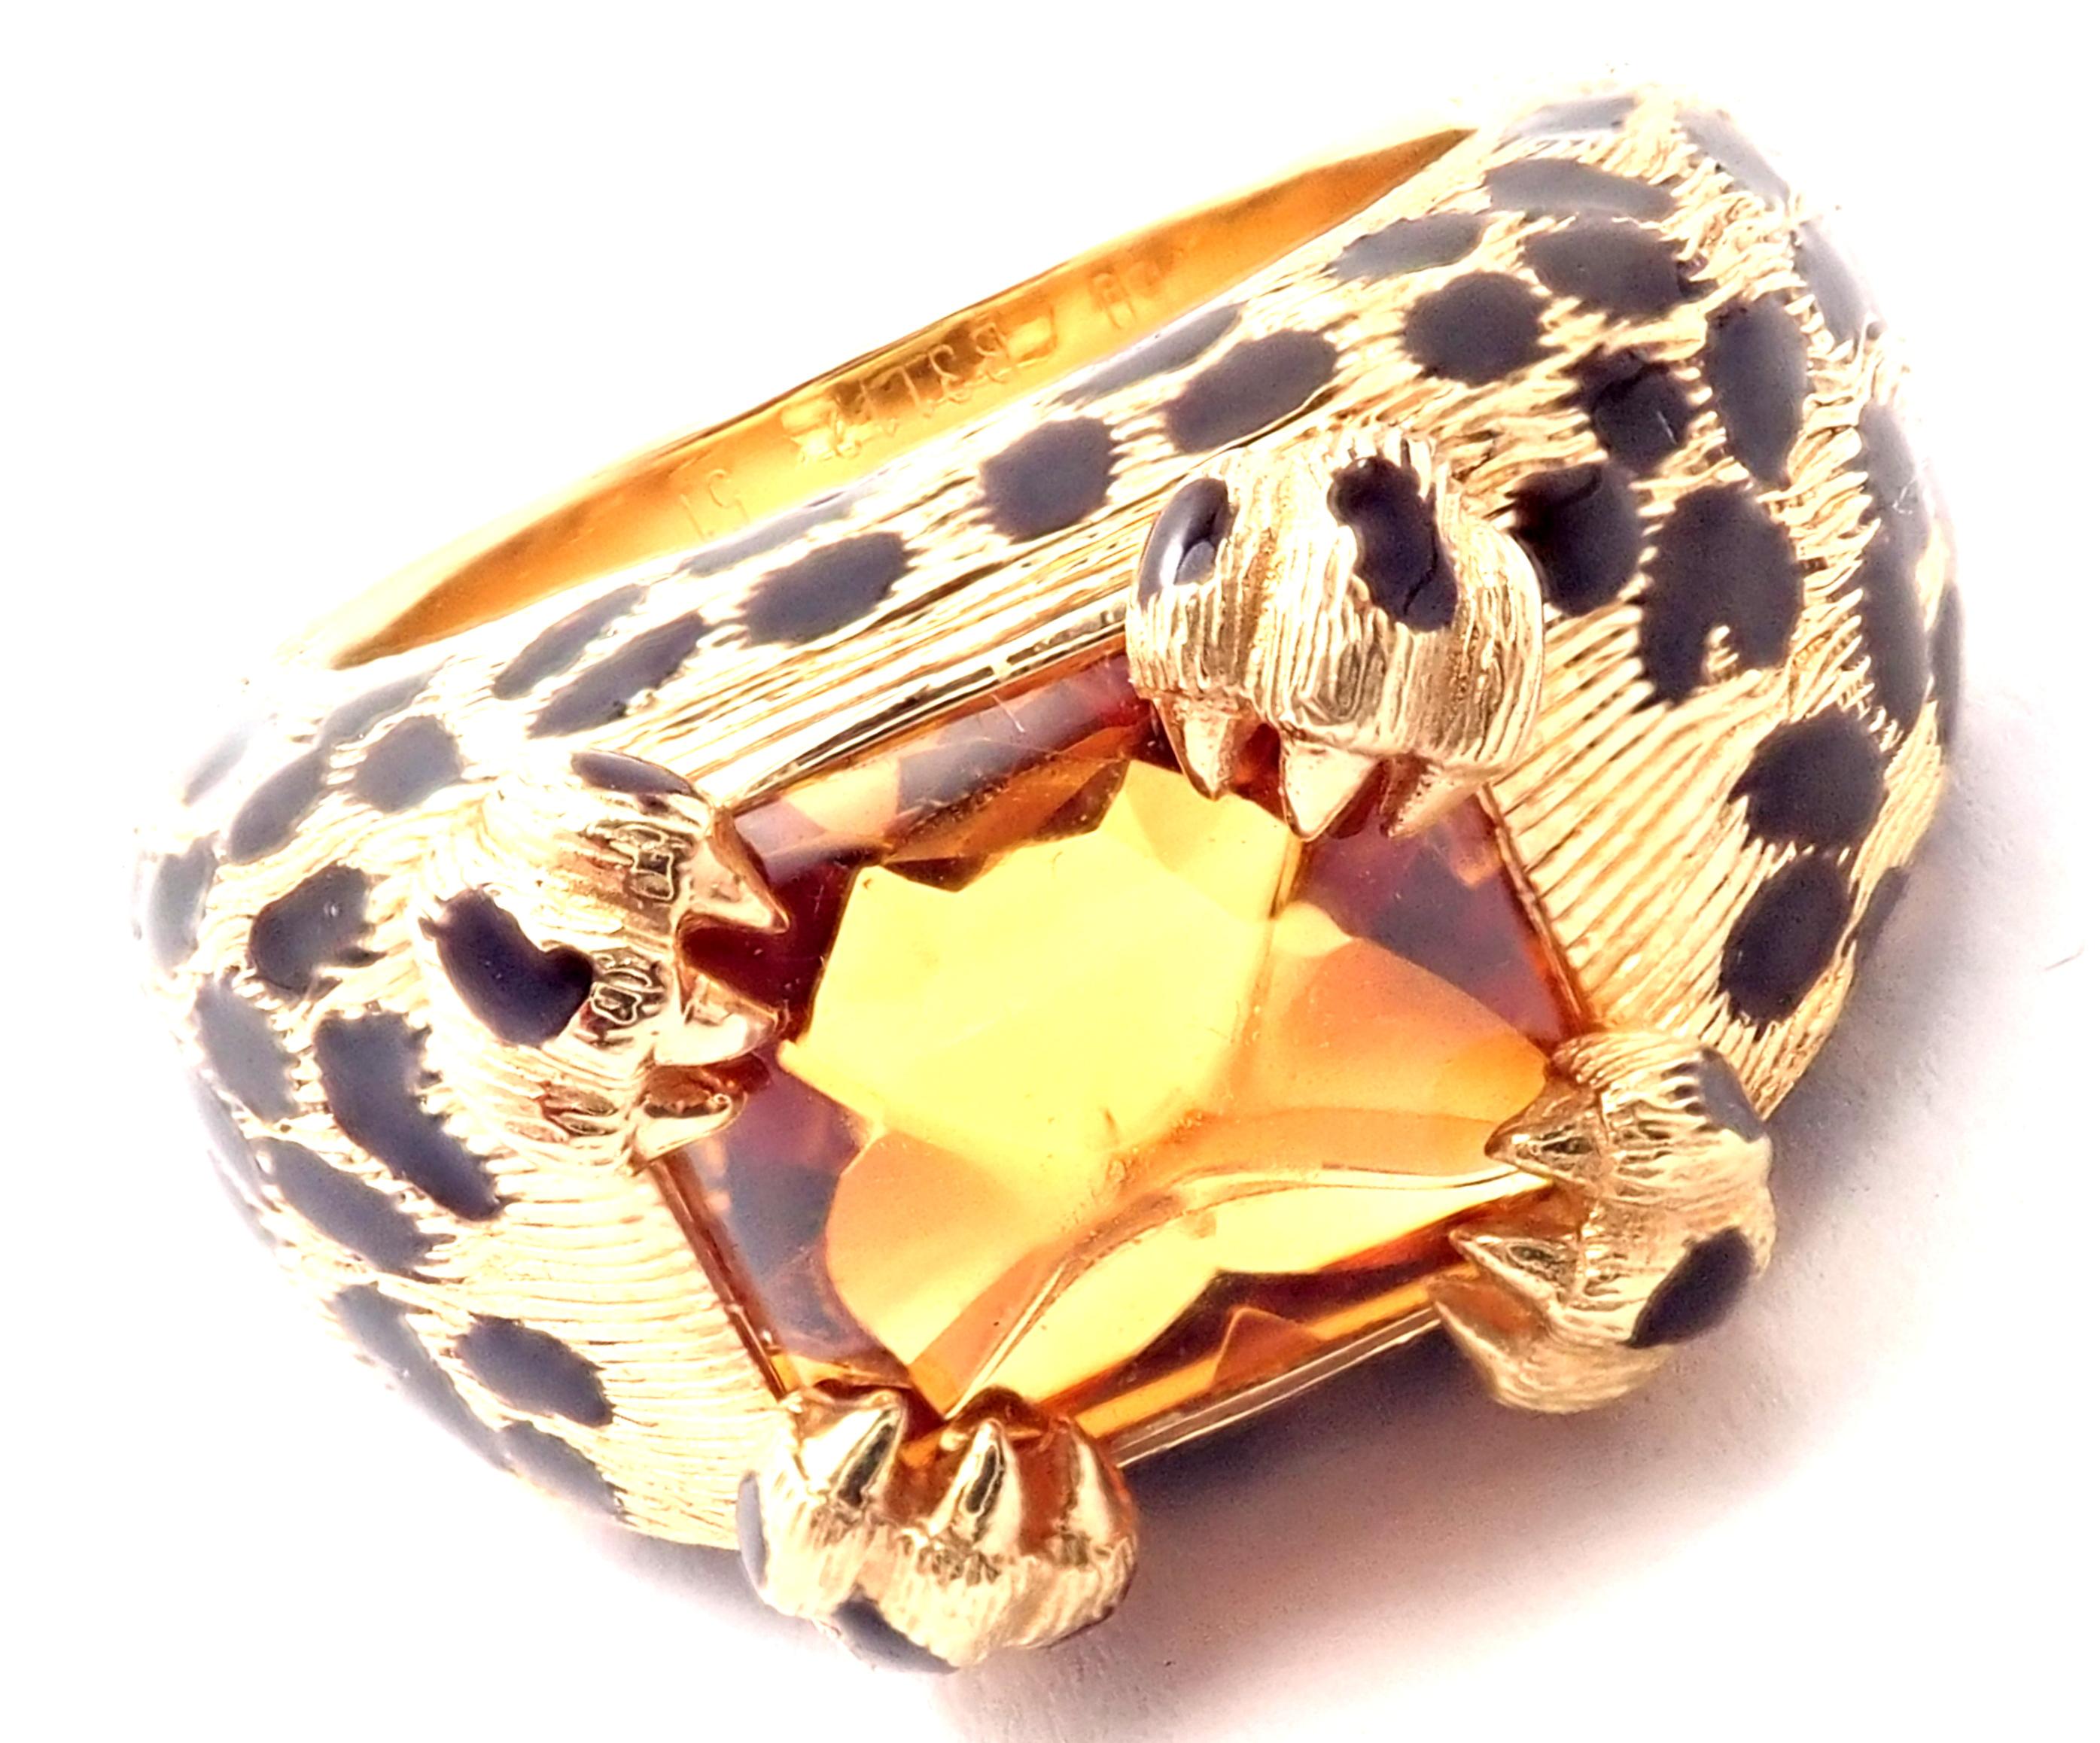 18k Yellow Gold Leopard Citrine & Enamel Ring by Christian Dior. 
This absolutely gorgeous ring comes with an original Dior certificate of authenticity. 
With One Large Citrine Stone: 10mm x 10mm.
Details: 
Size: European 51, US 5 3/4
Width at Top: